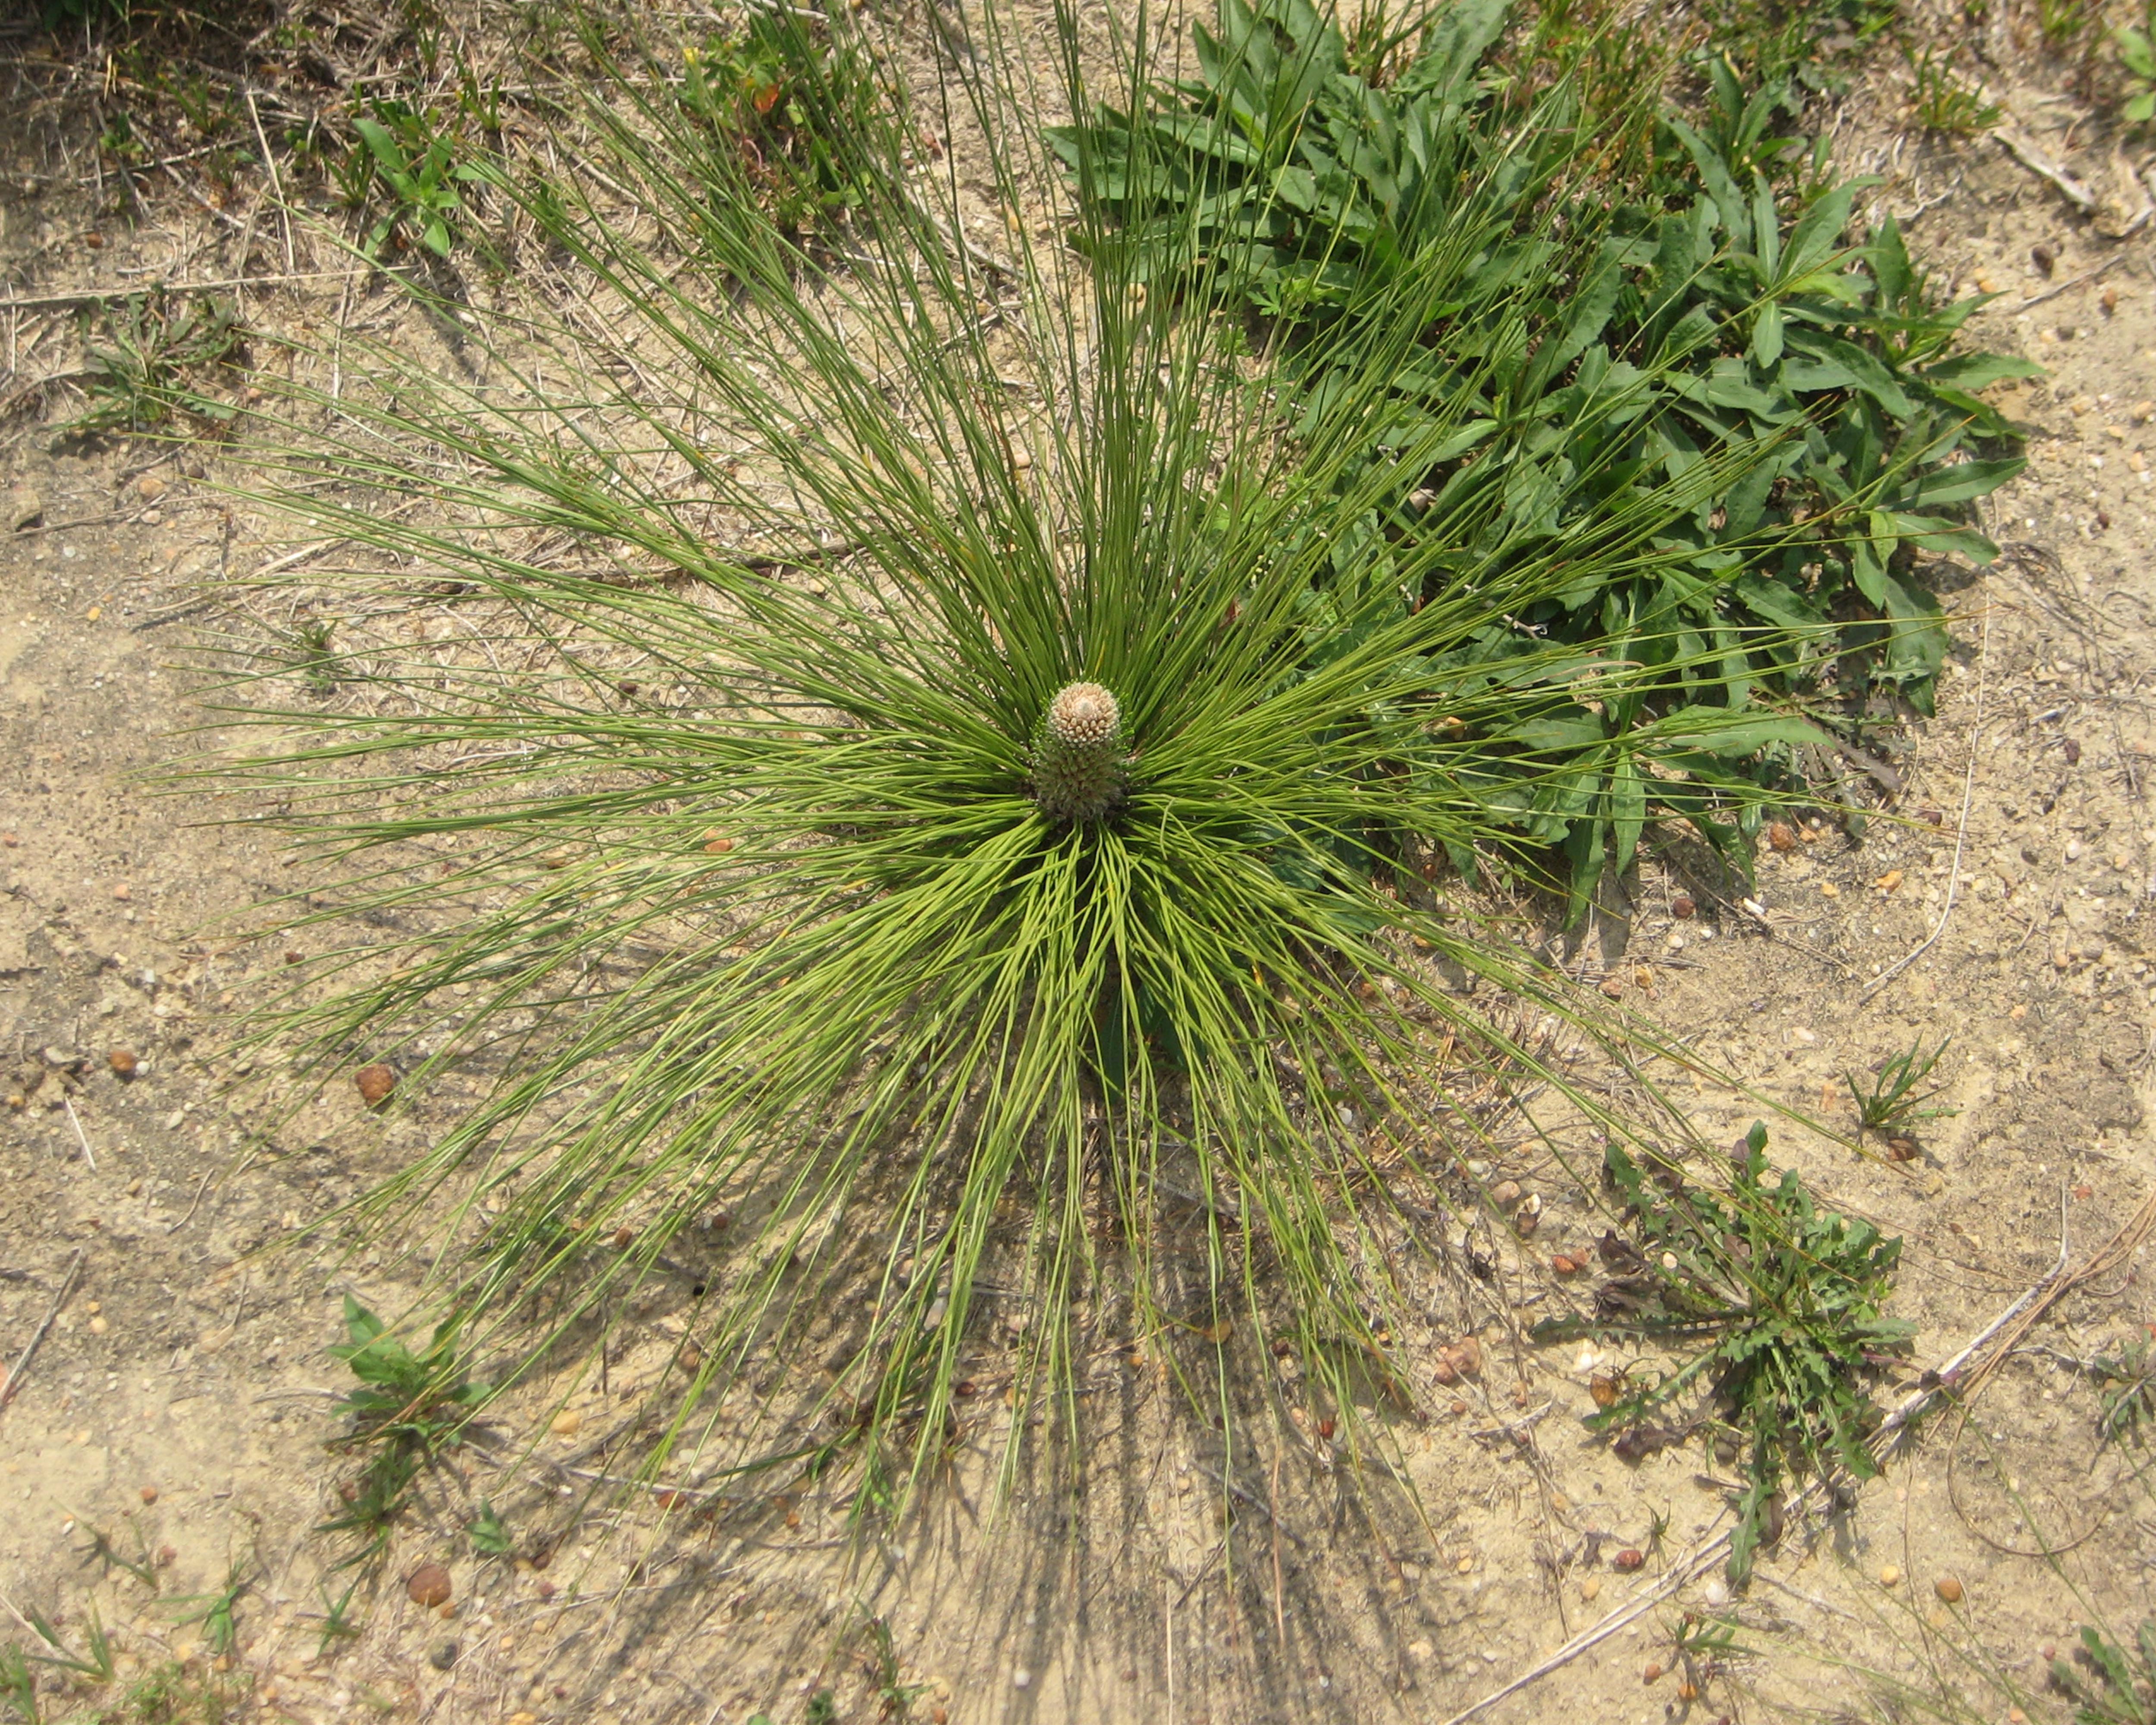 Longleaf pine seedling exiting the “grass stage”.